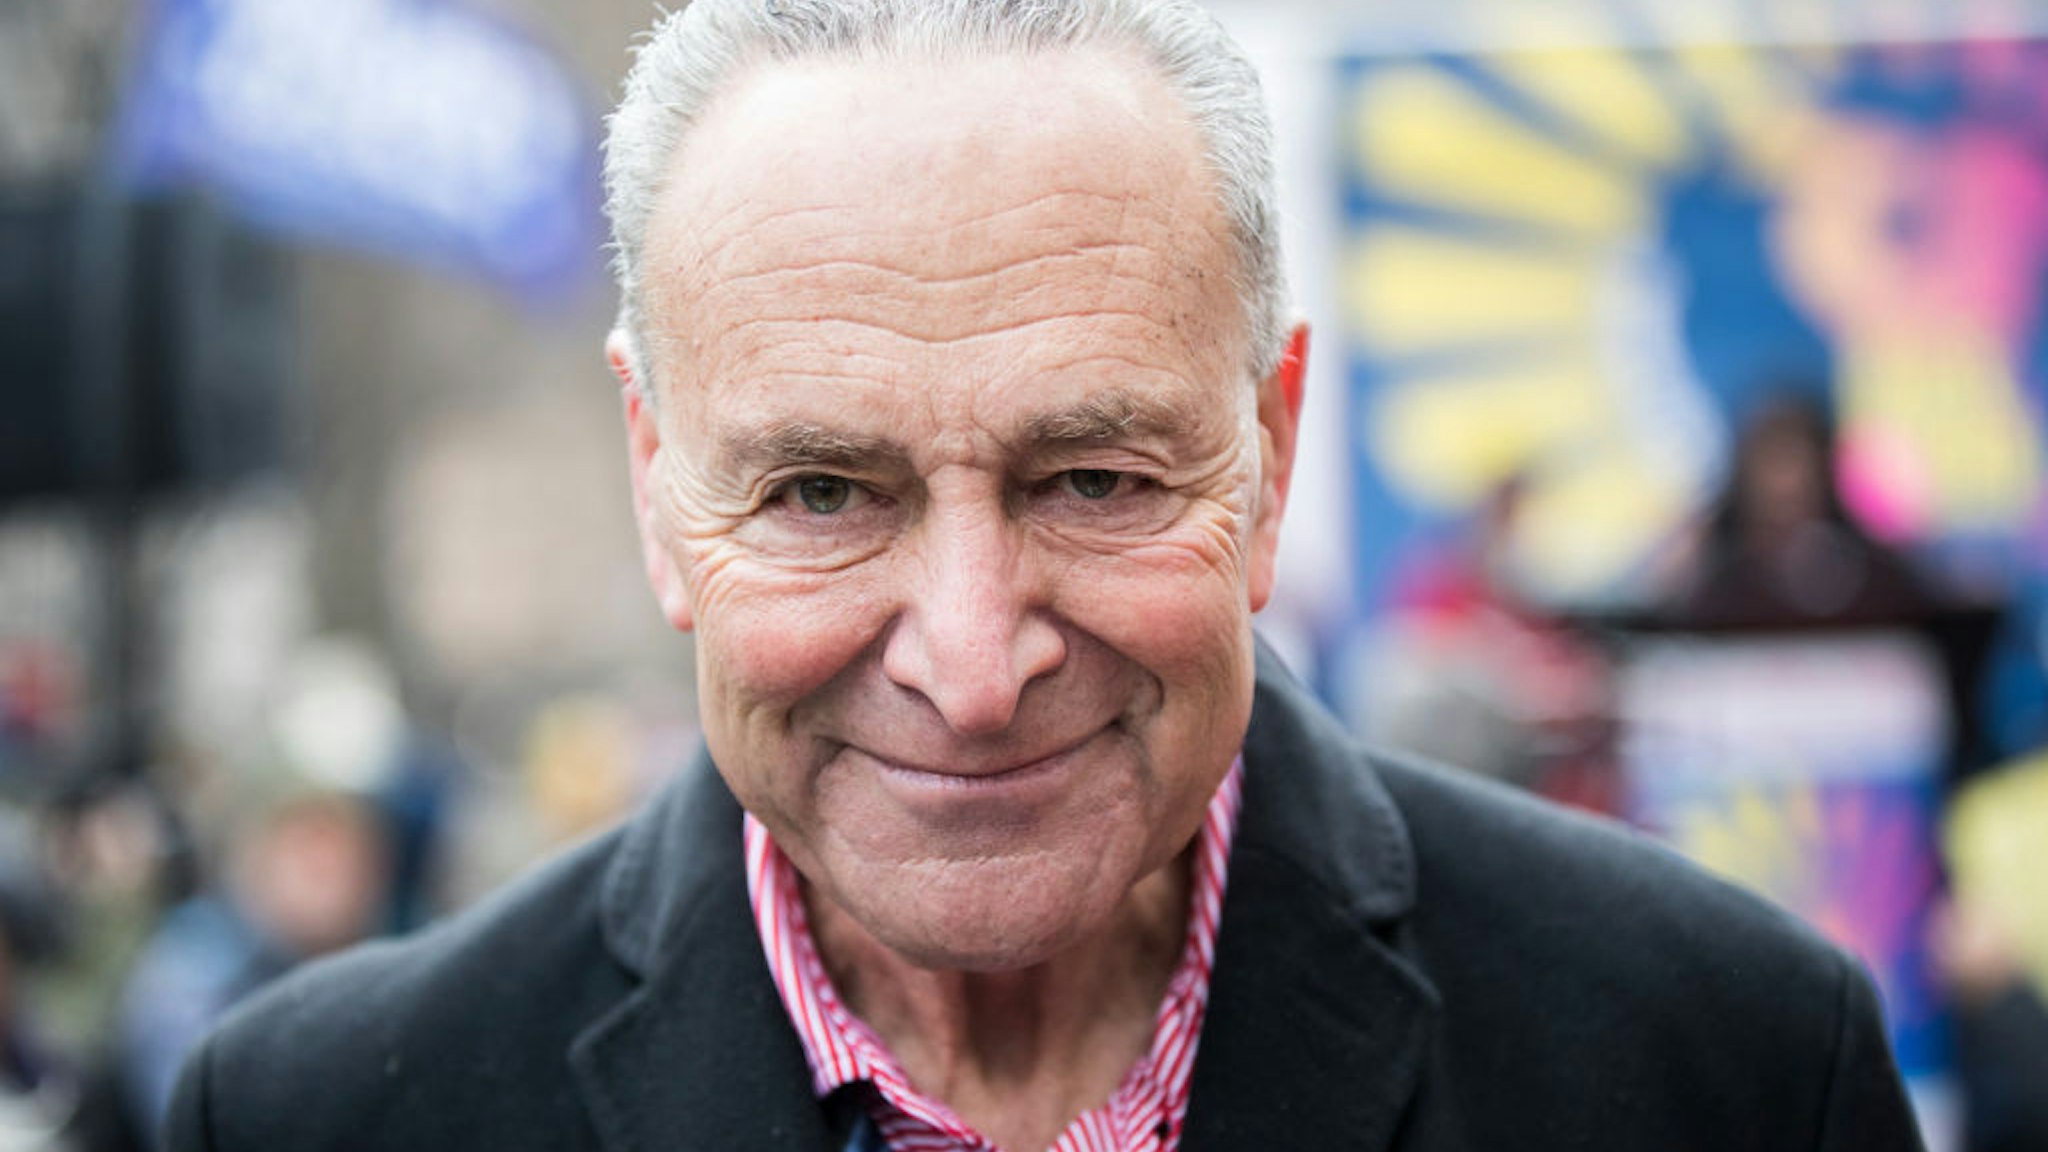 United States Senate Minority Leader and Senator from New York Chuck Schumer greets marchers to show his support with the Rise & Roar stage behind him during the Woman's March in the borough of Manhattan in NY on January 18, 2020, USA.